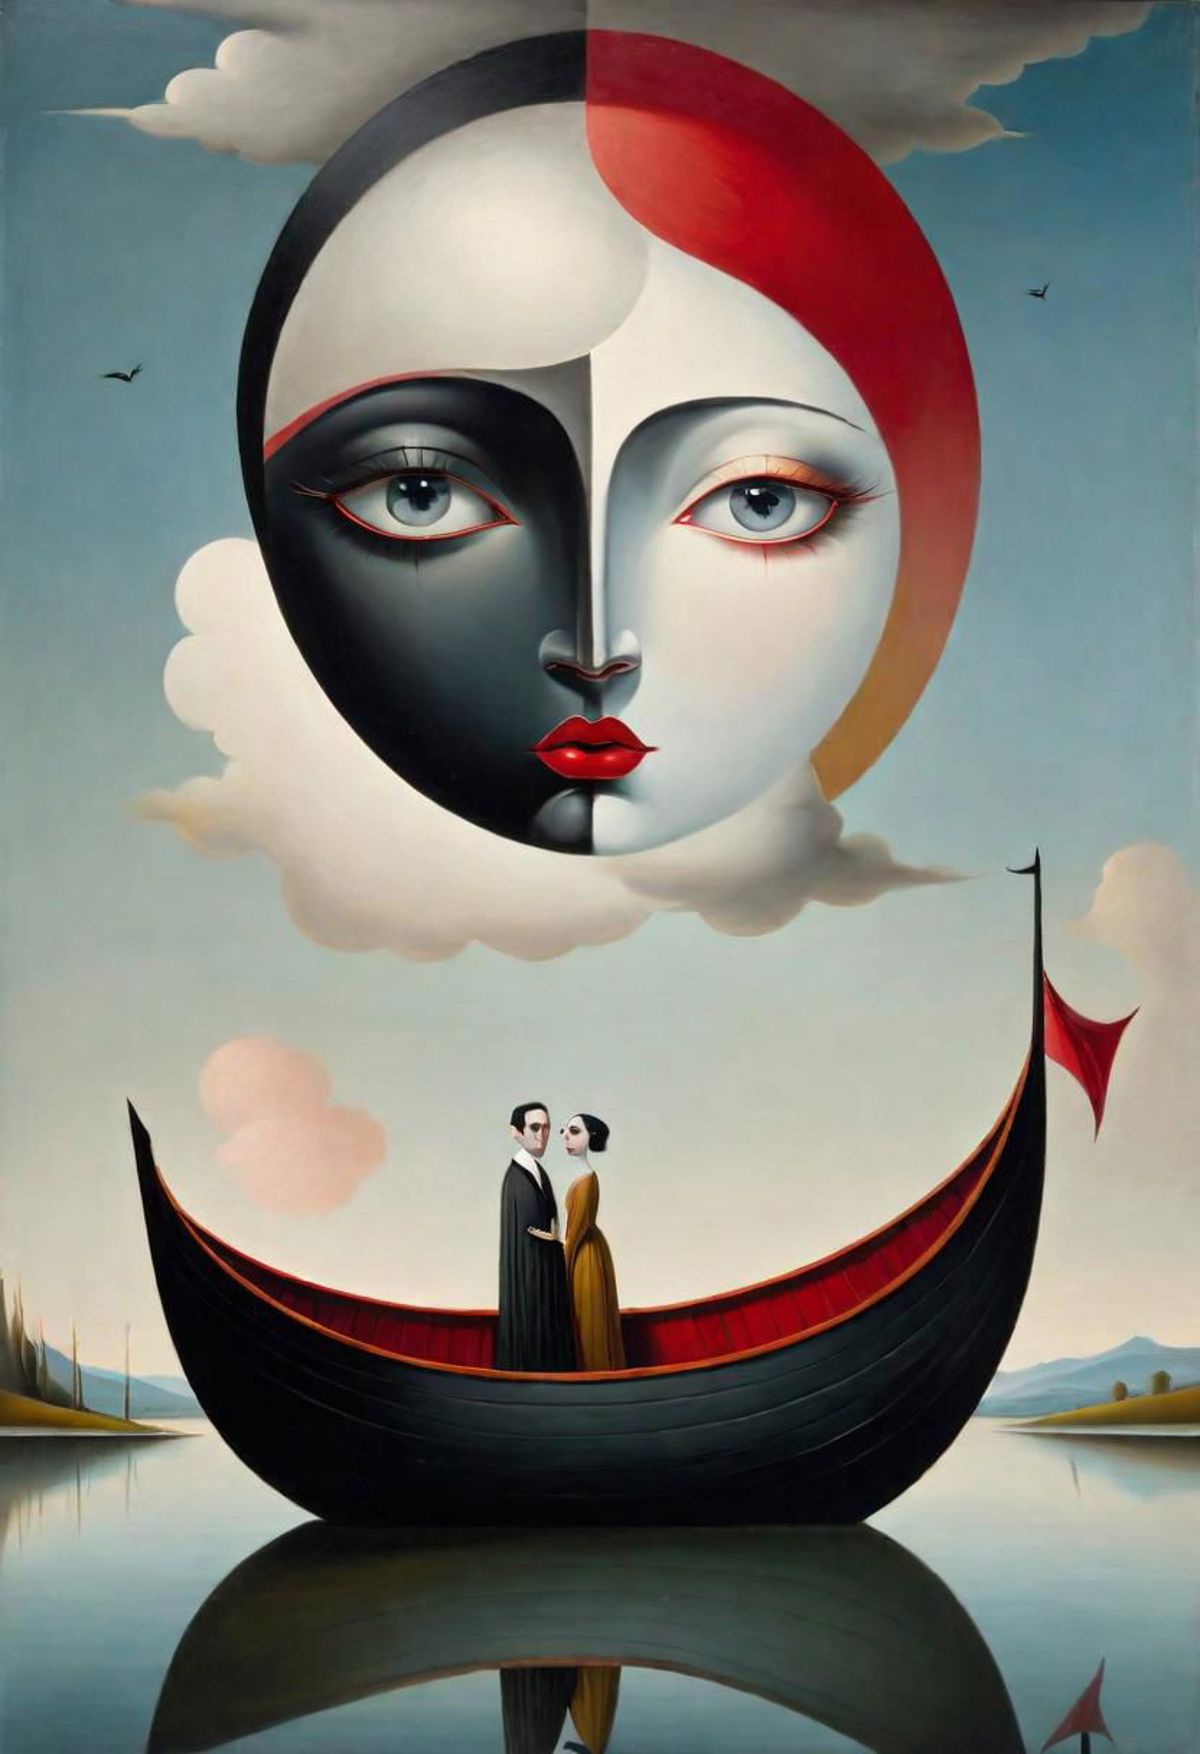 The image features a painting of a man and a woman standing together in a small boat, which is situated under a moon. The moon appears to be a prominent element in the painting, with the man and woman positioned at the center, possibly posing for a portrait. The boat is located in the lower half of the painting, and the couple seems to be enjoying their time together in this serene setting.